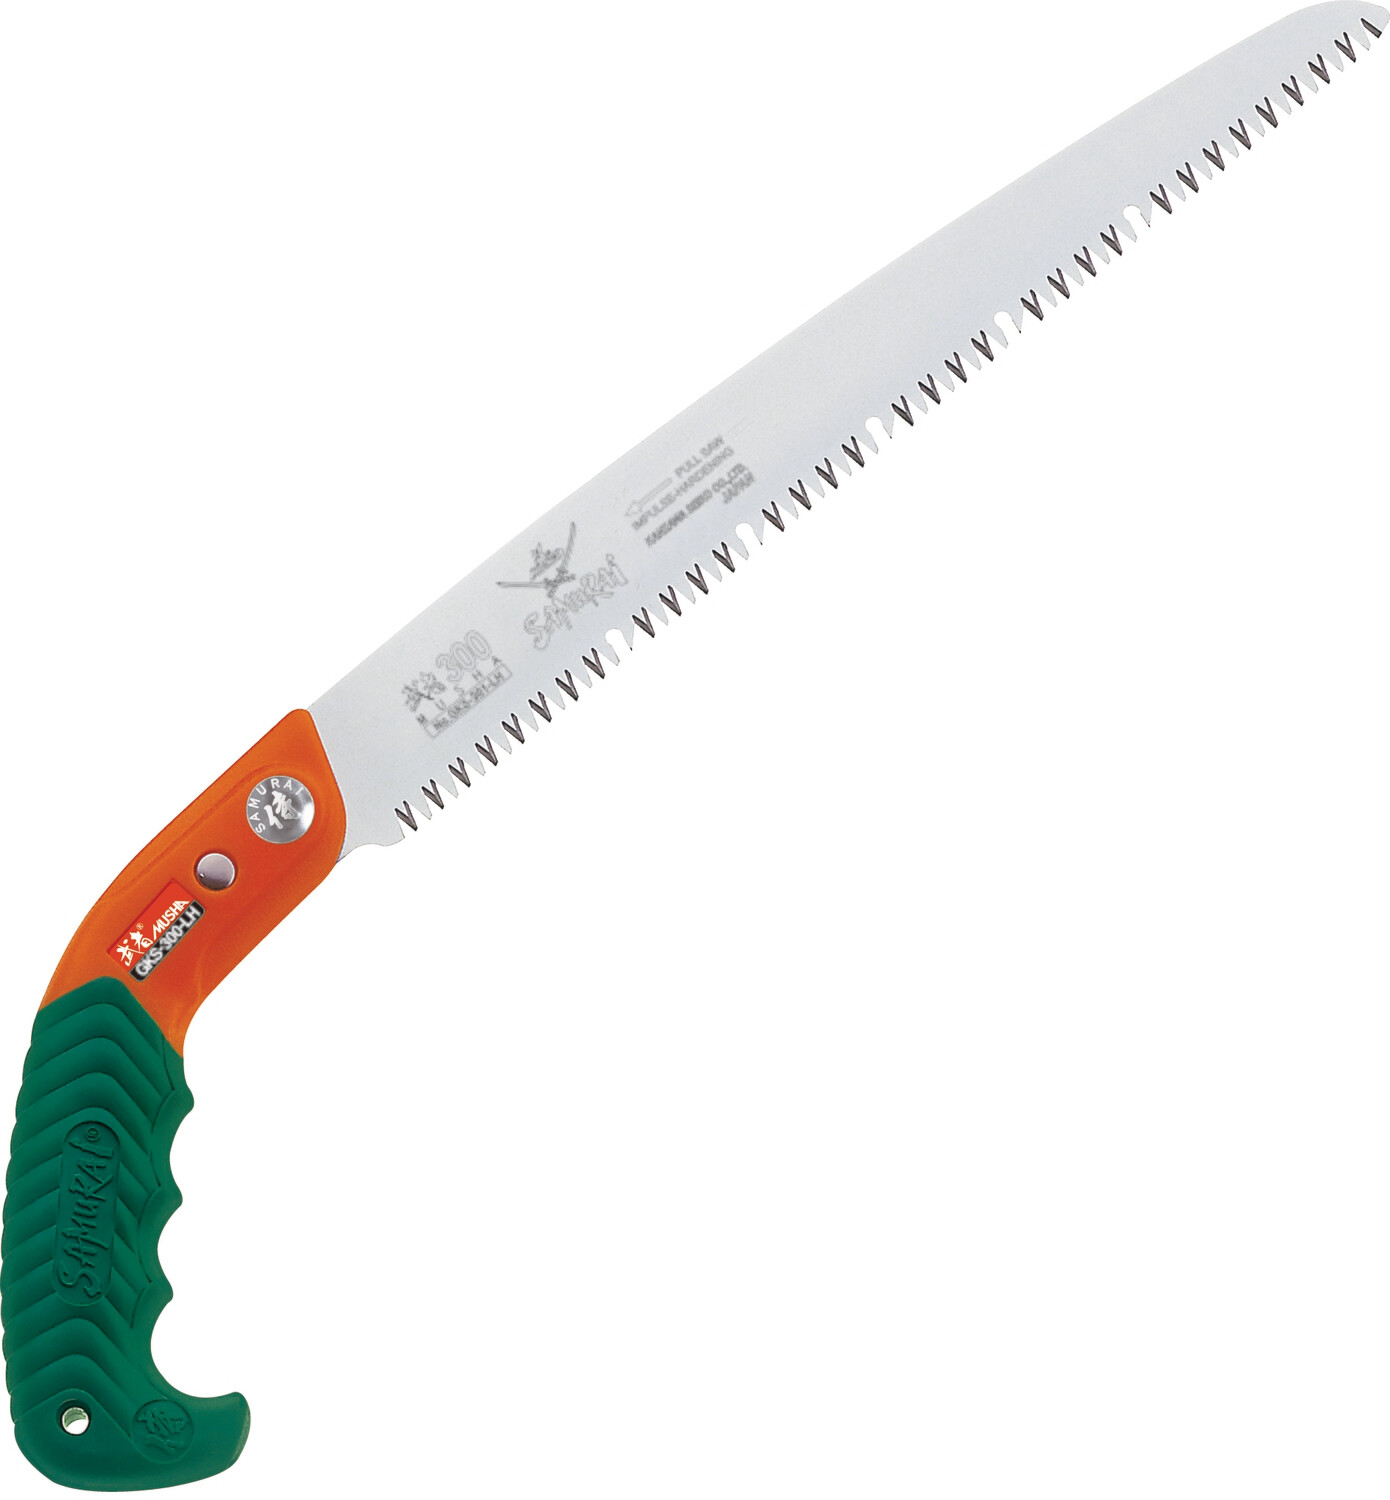 GKS MUSHA Straight saw with self-cleaning blade